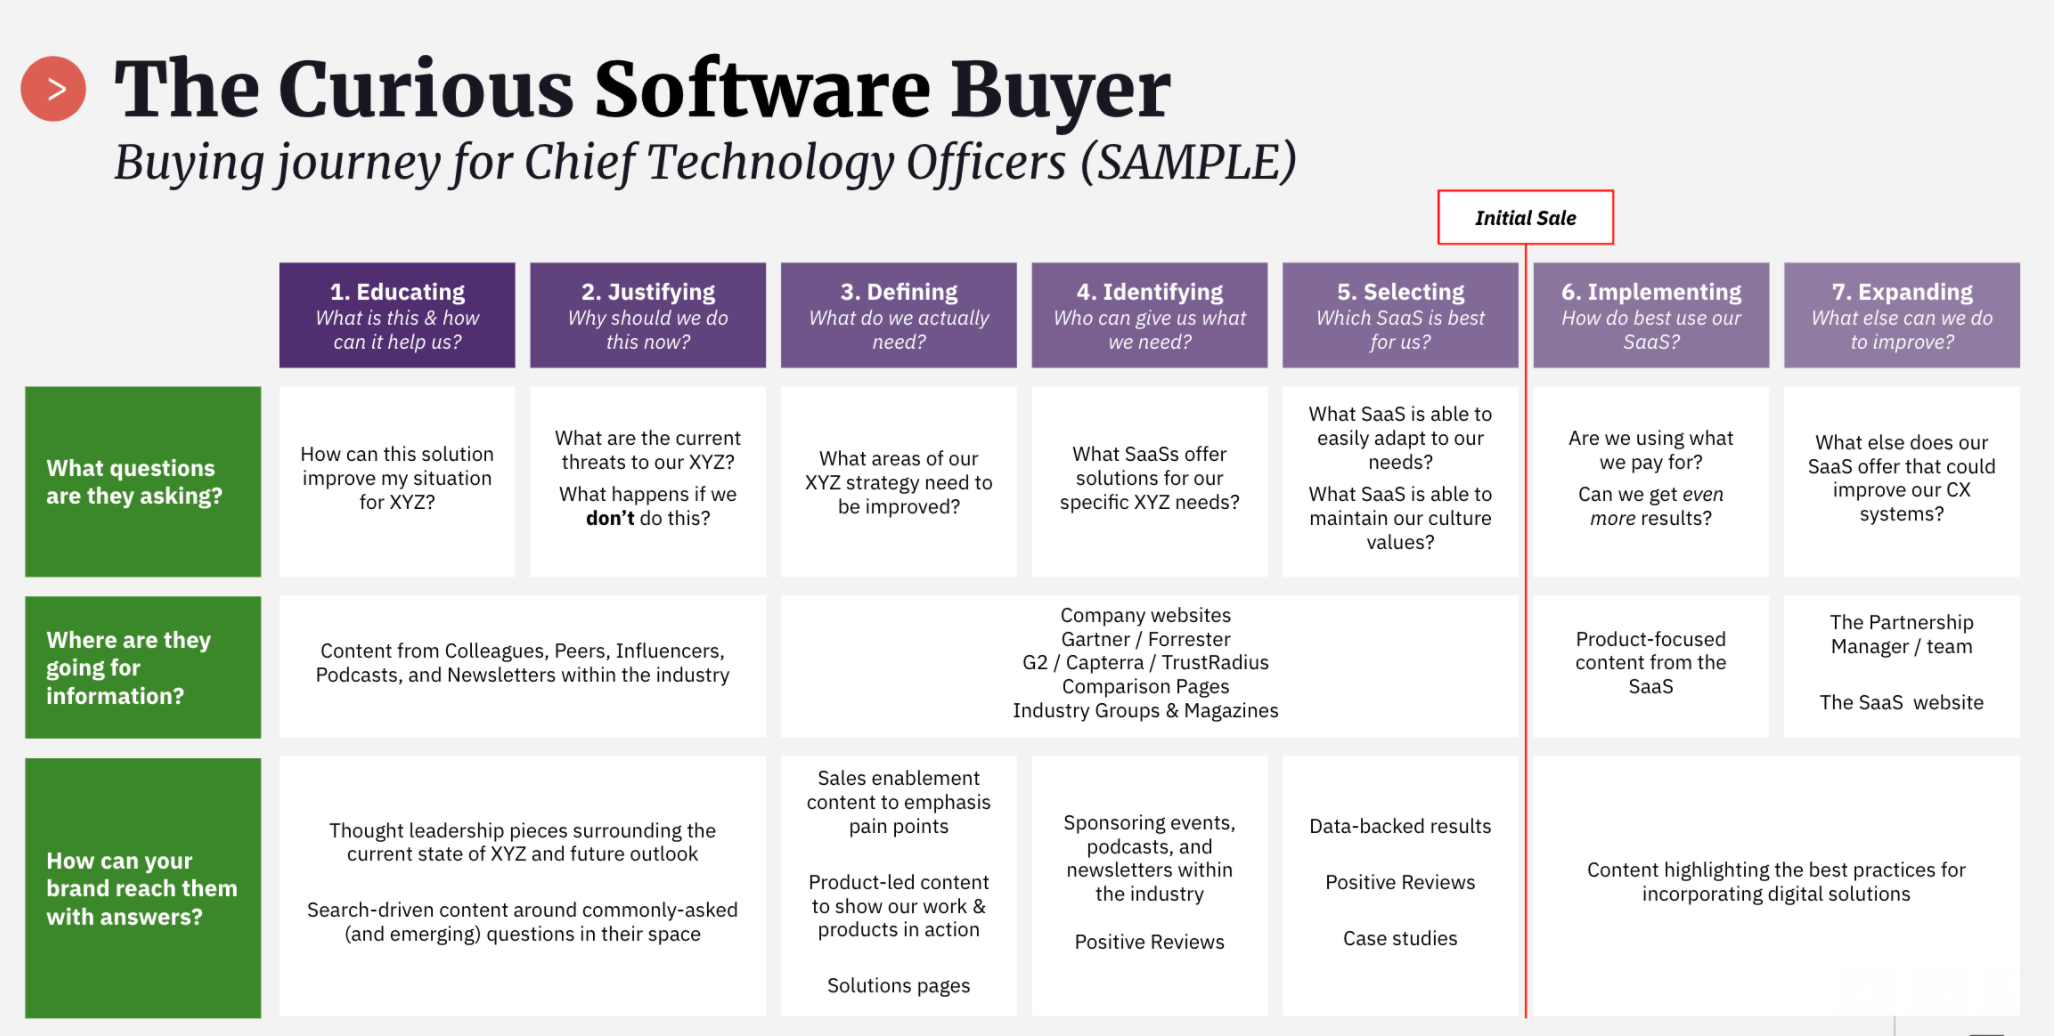 The Curious Software Buyer Journey Map